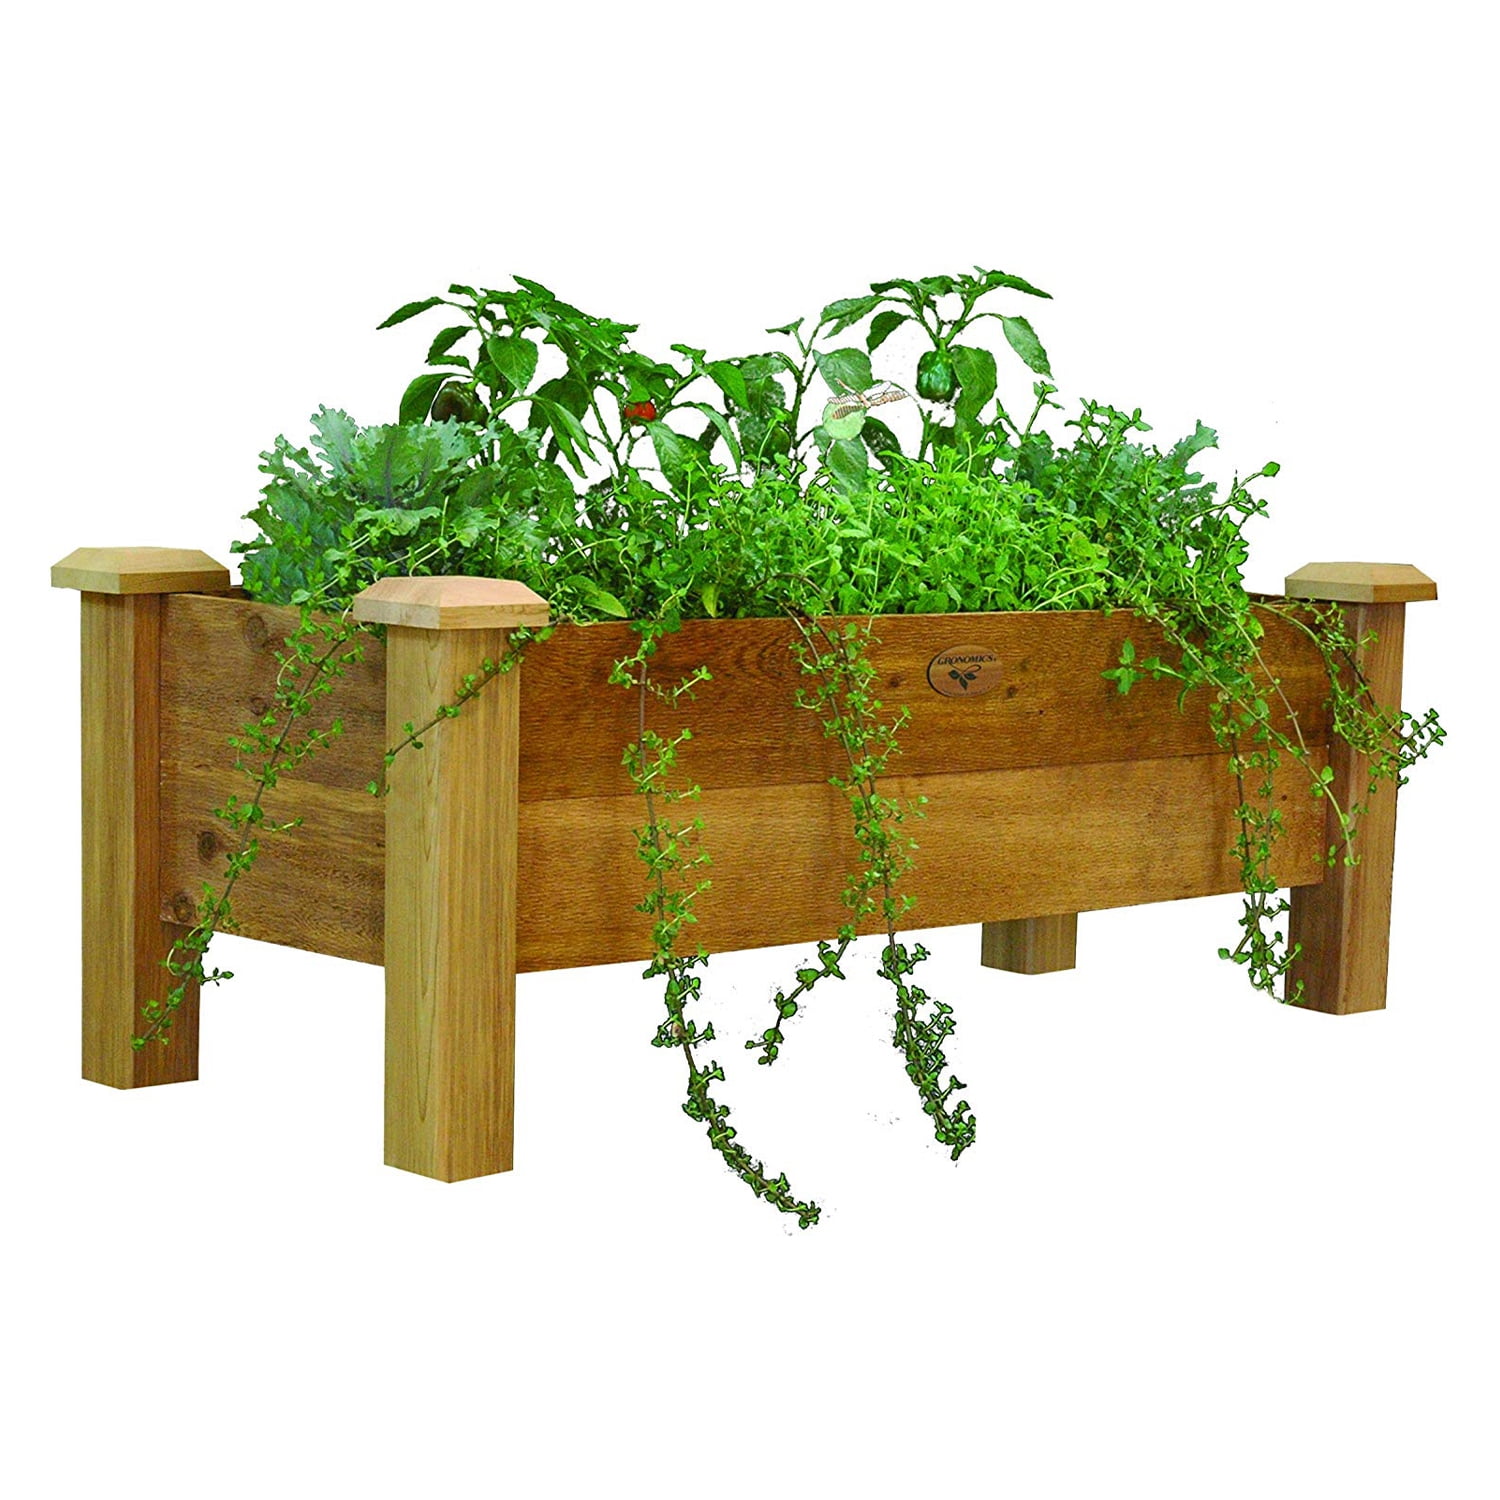 Gronomics Western Red Cedar Rustic Planter Box 18 x 48 x 19 Inches, Unfinished